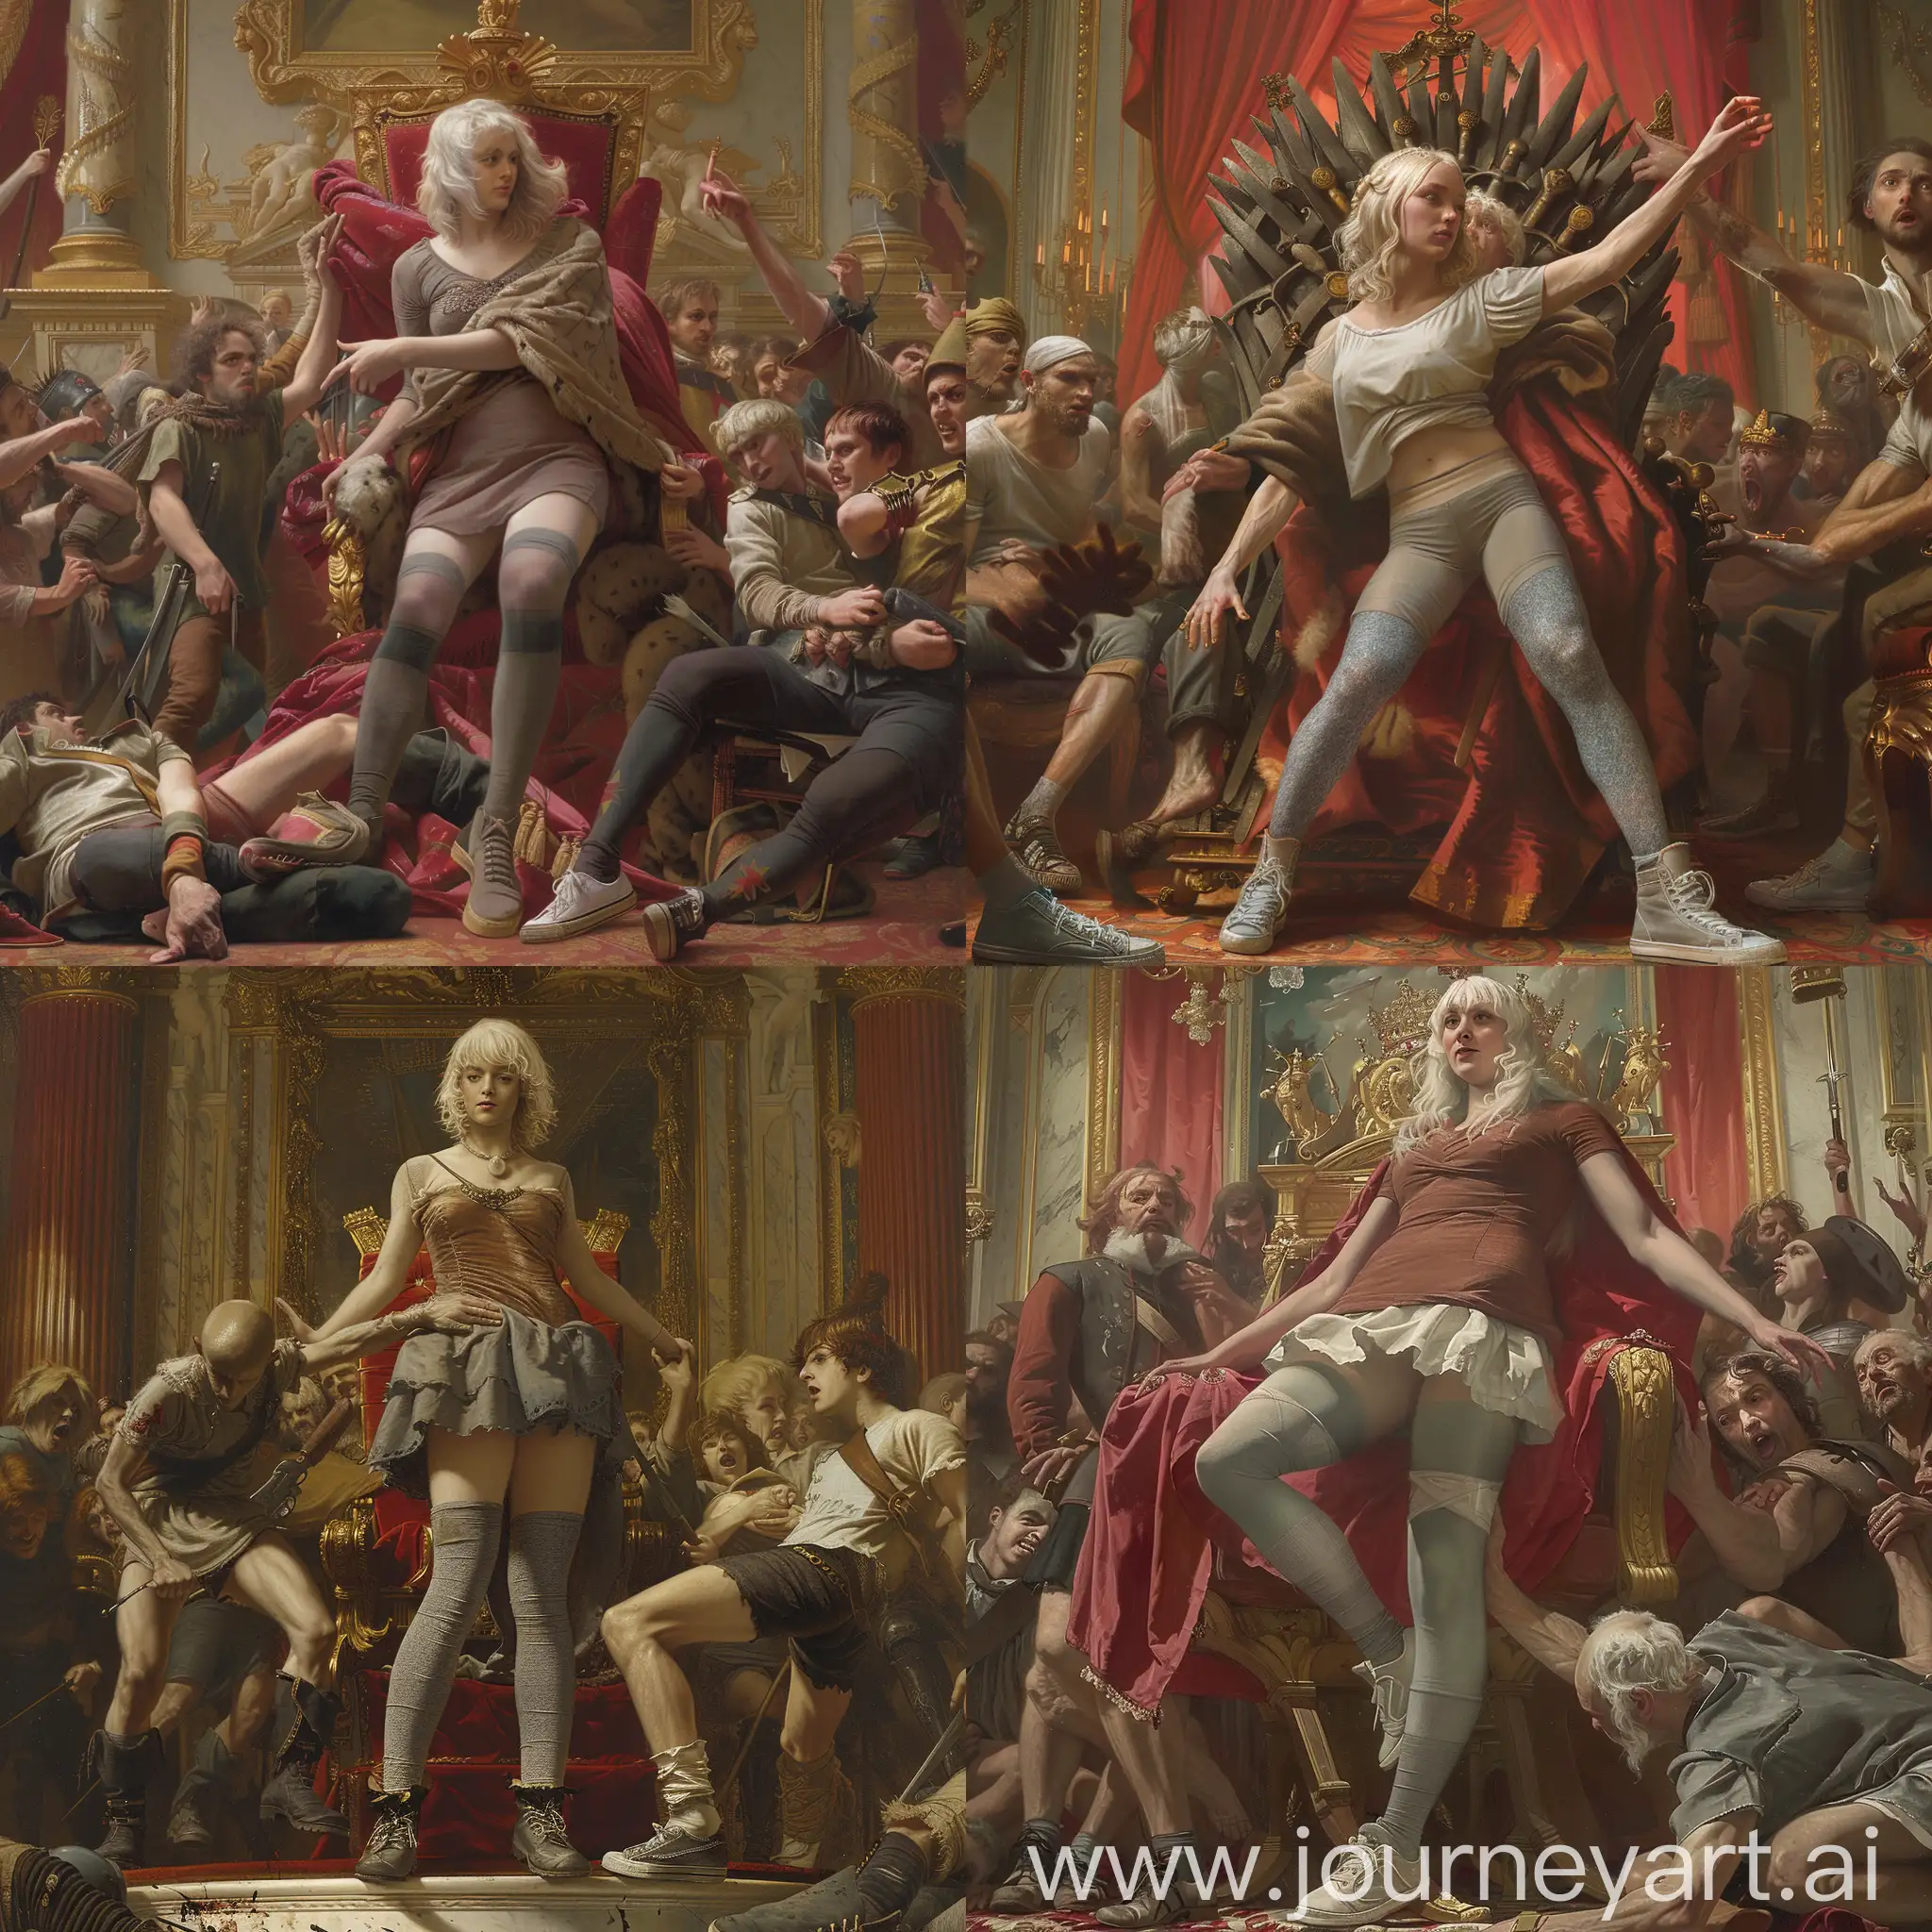 King-Louis-XIII-Guarded-by-Unarmed-Warrior-in-Throne-Room-Amidst-Rebellion